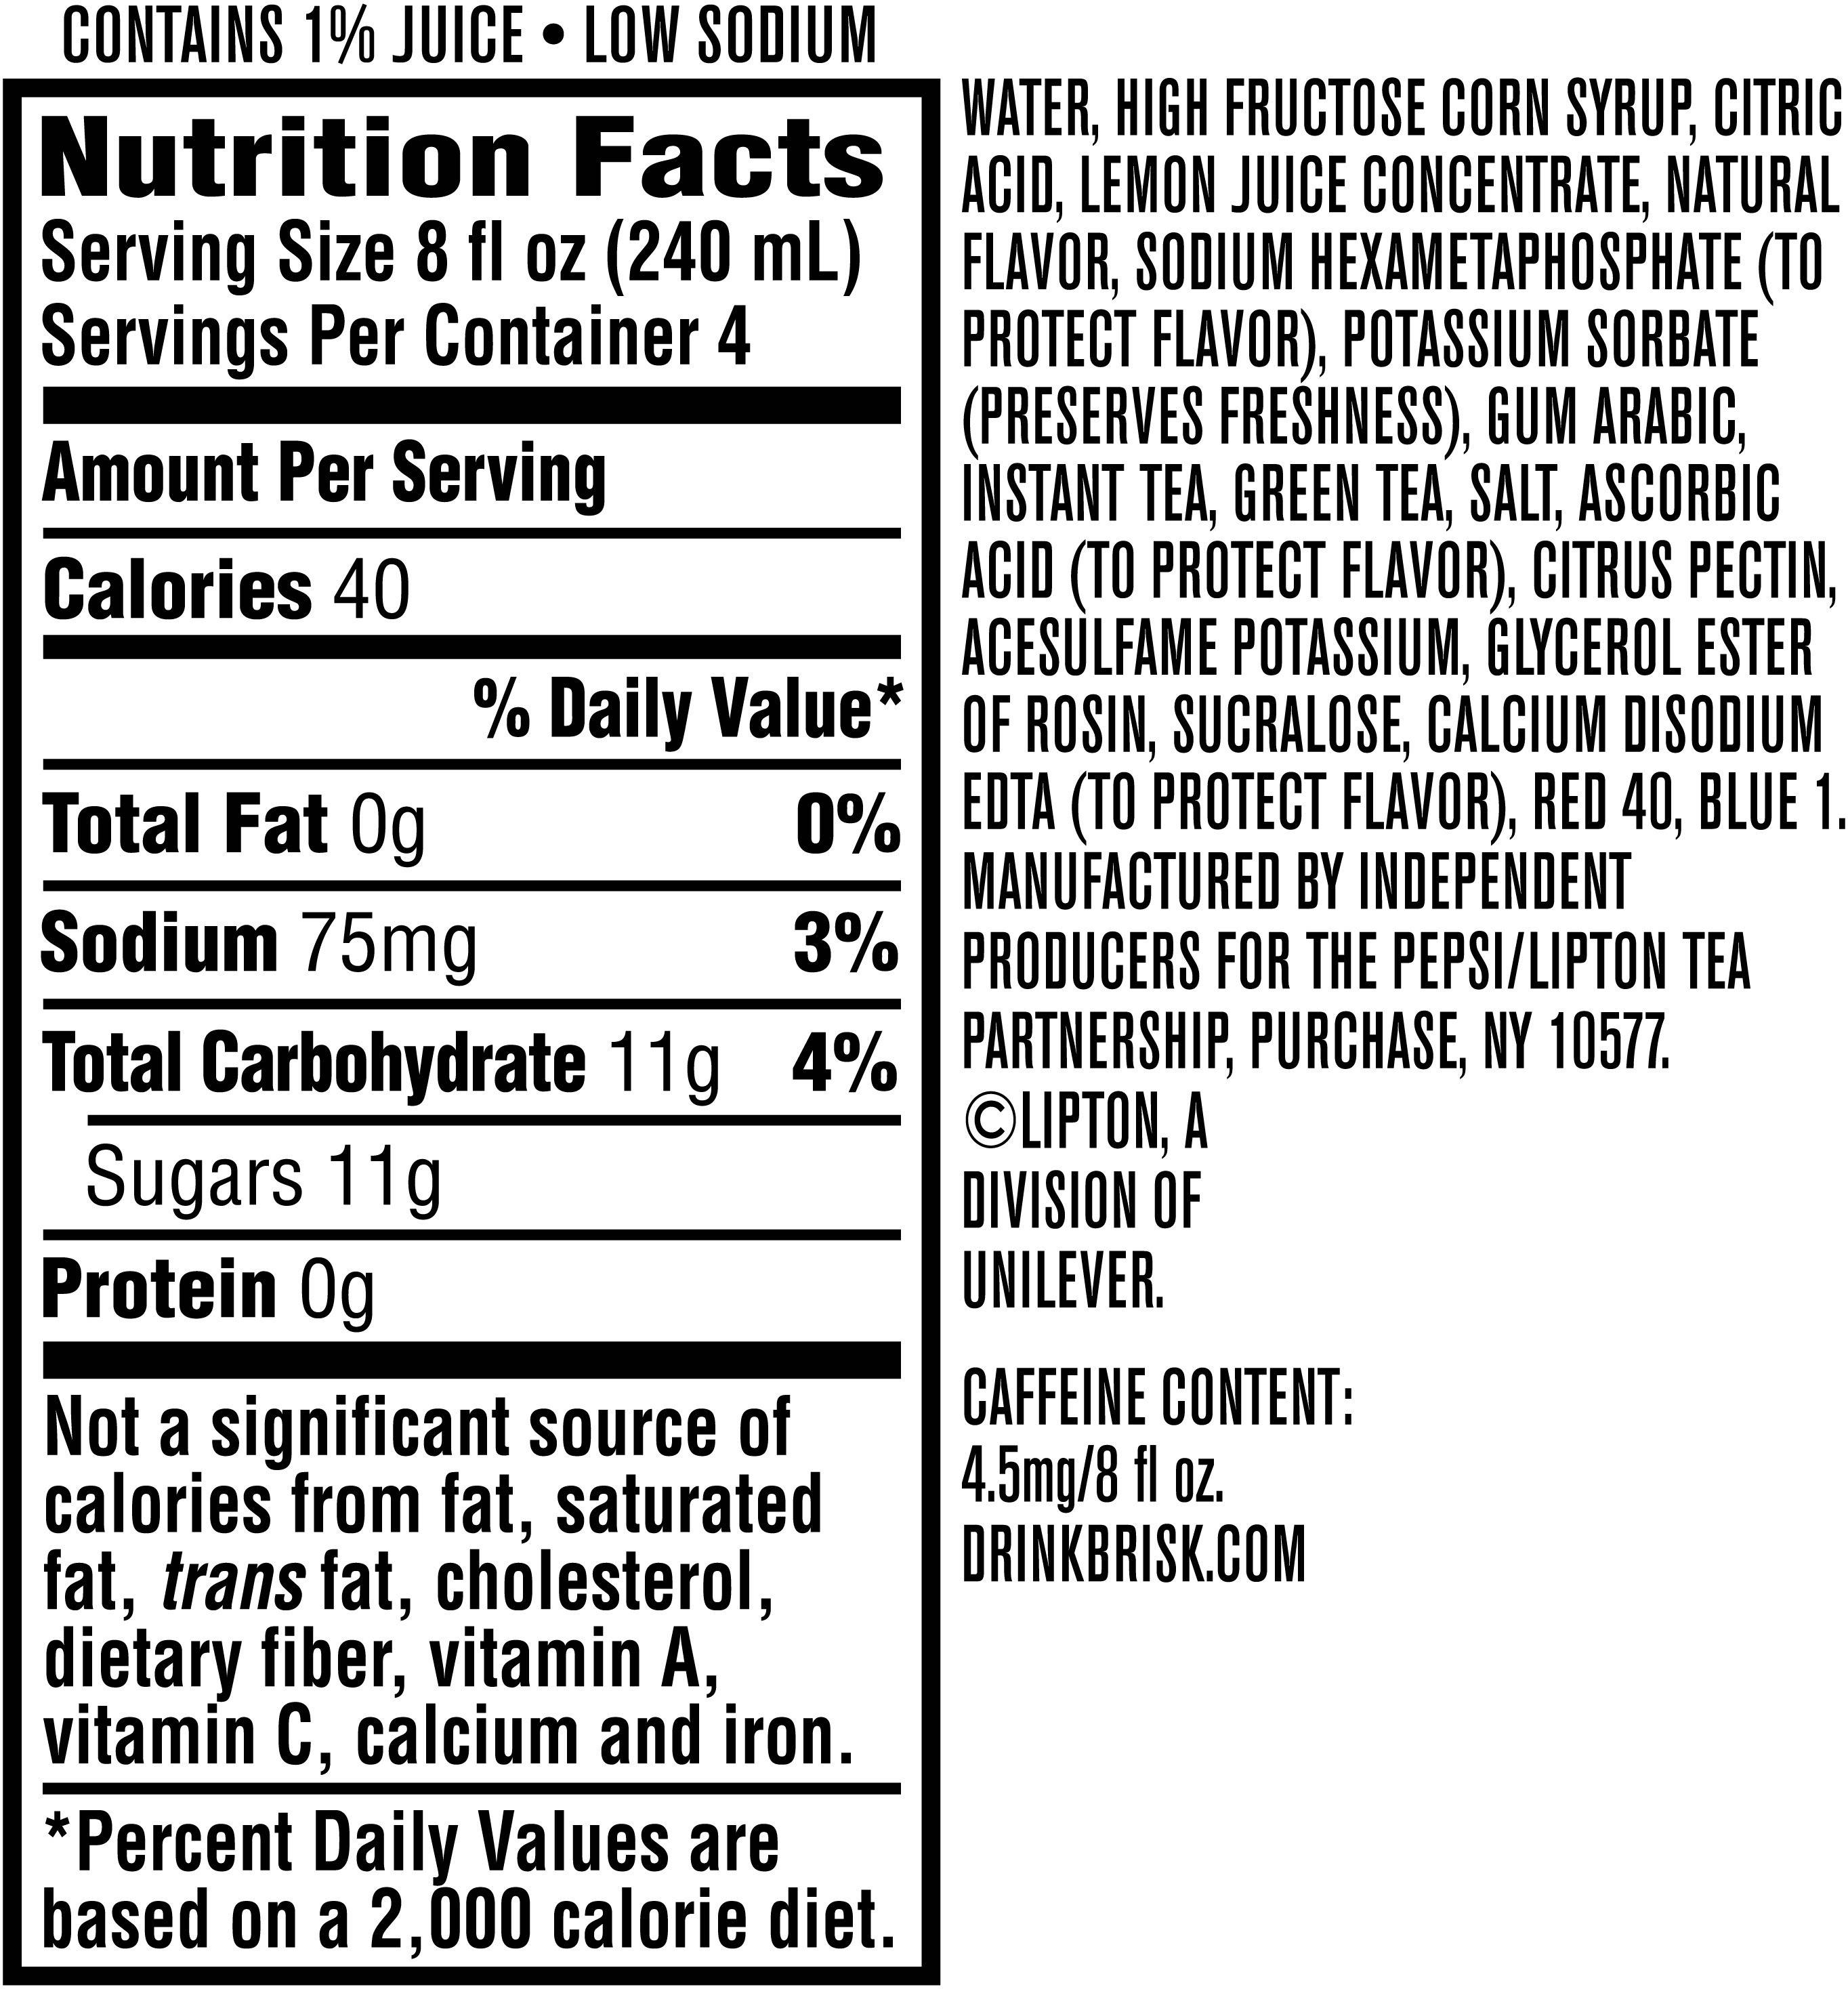 Image describing nutrition information for product Brisk Iced Tea + Cherry Limeade